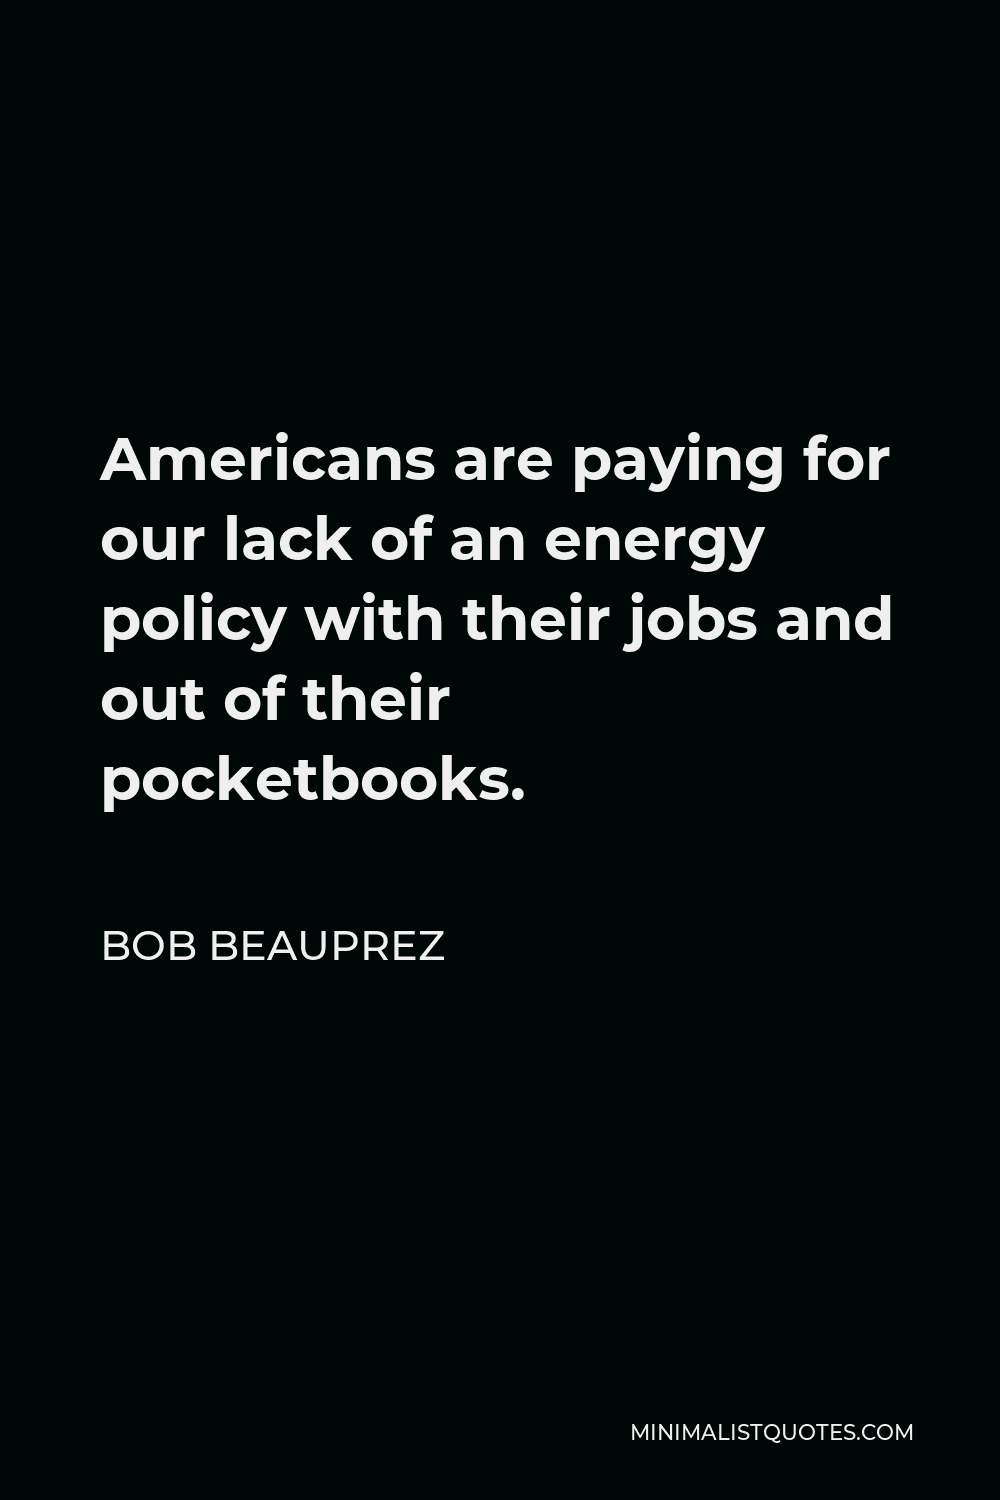 Bob Beauprez Quote - Americans are paying for our lack of an energy policy with their jobs and out of their pocketbooks.